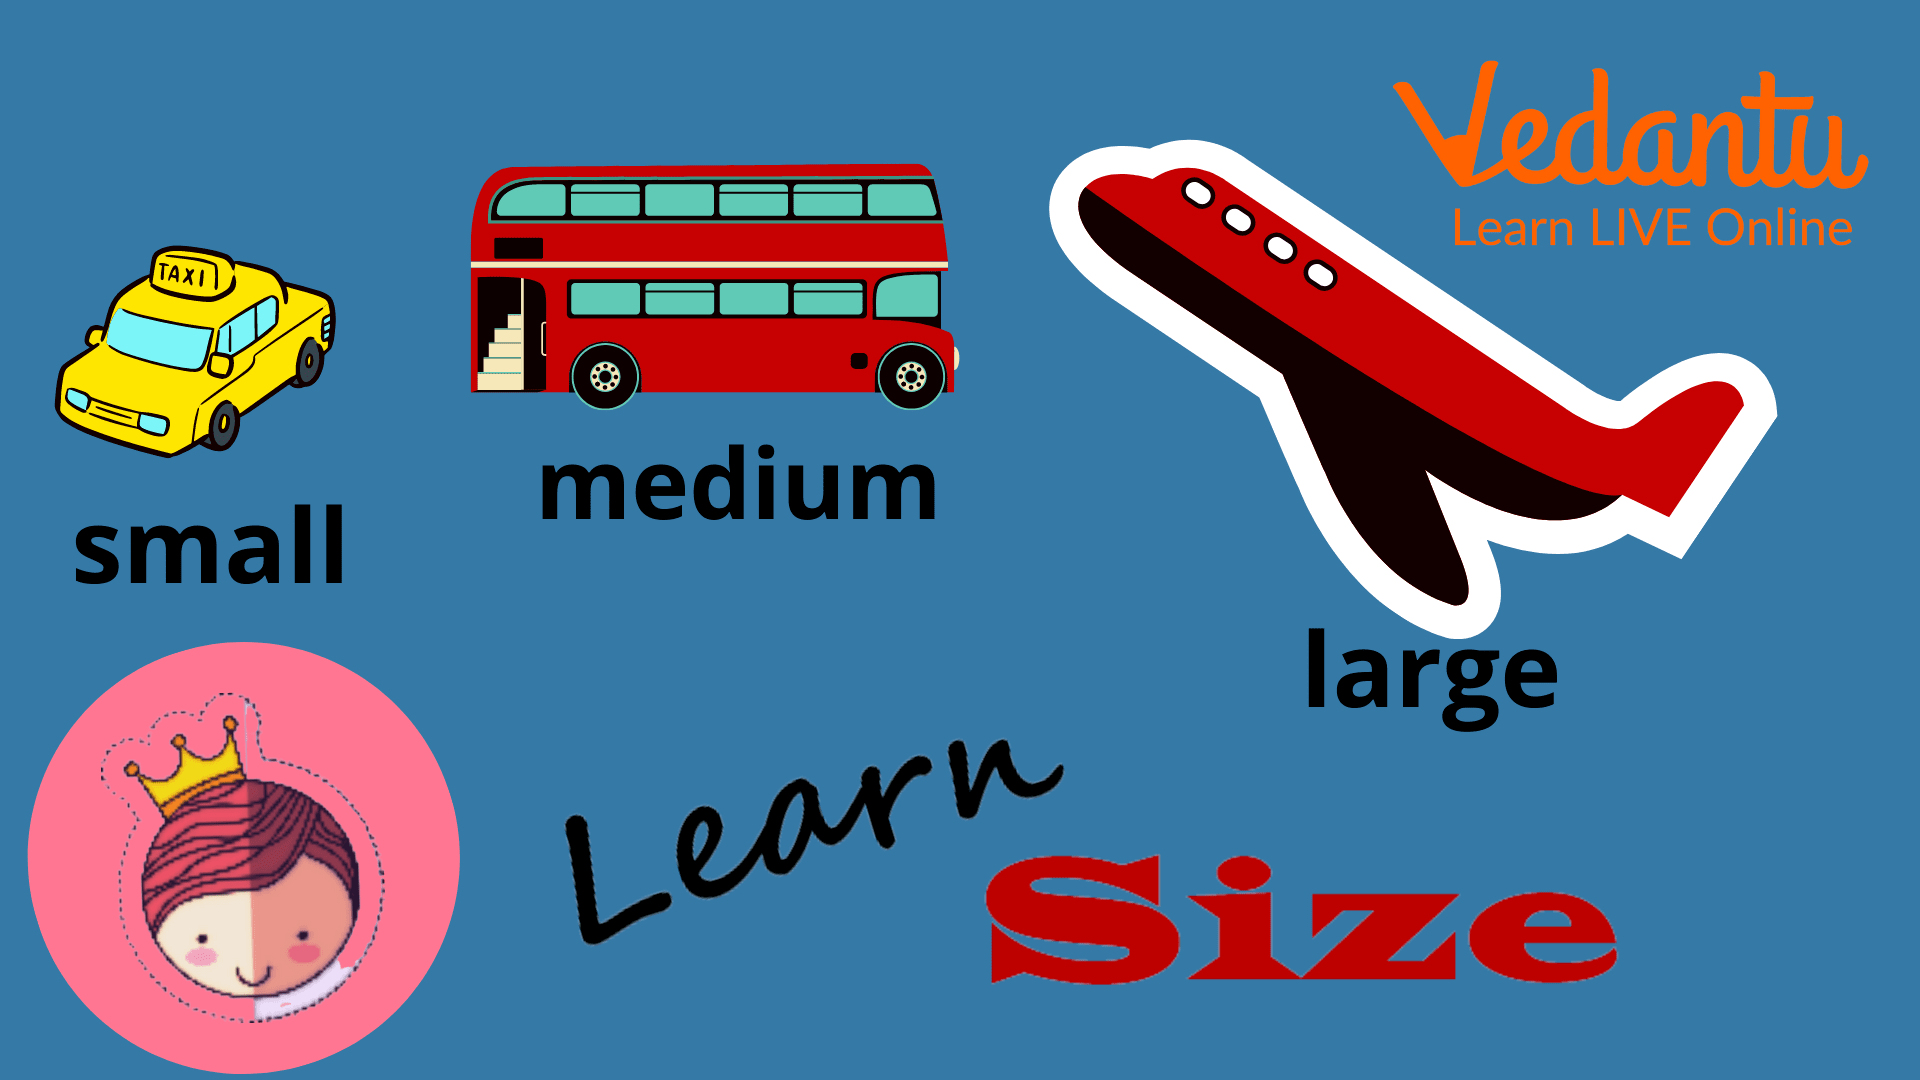 Plane is larger than bus and cab